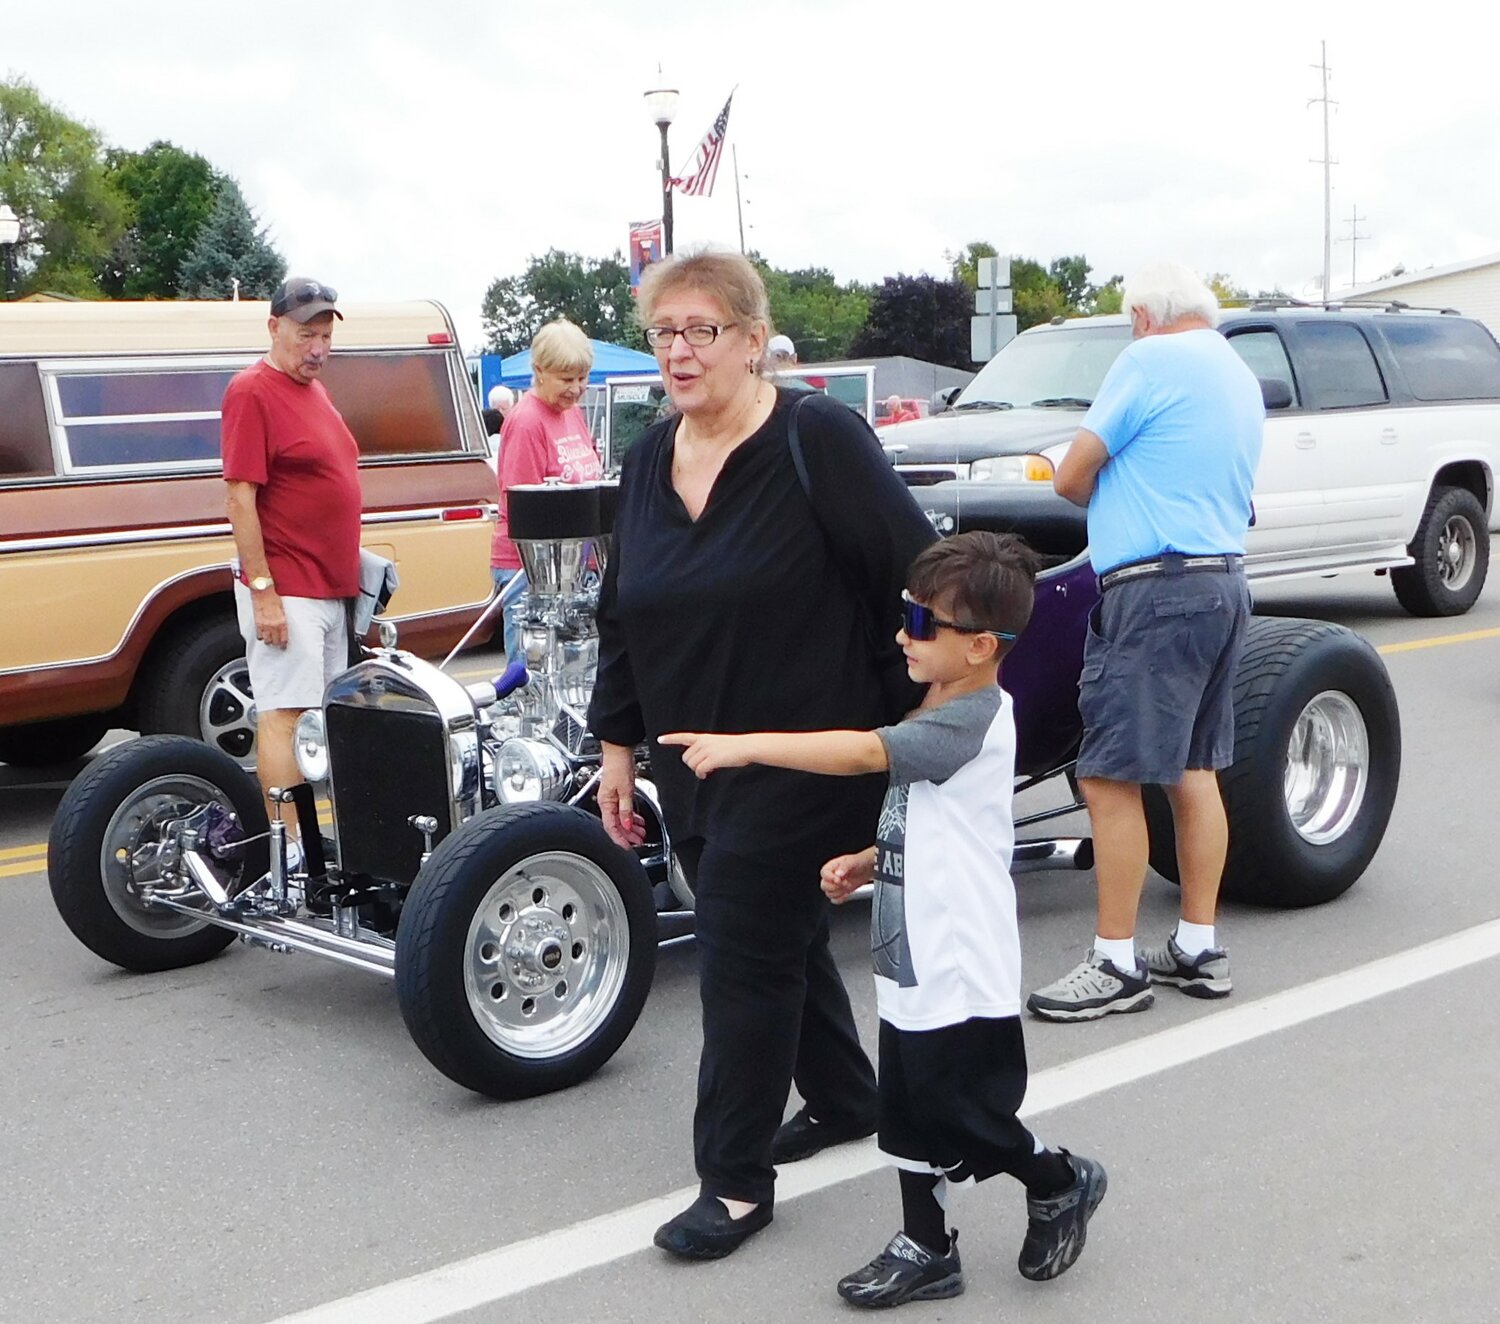 All ages enjoy the Harrison Street Fair and the Old 27 US Car Tour